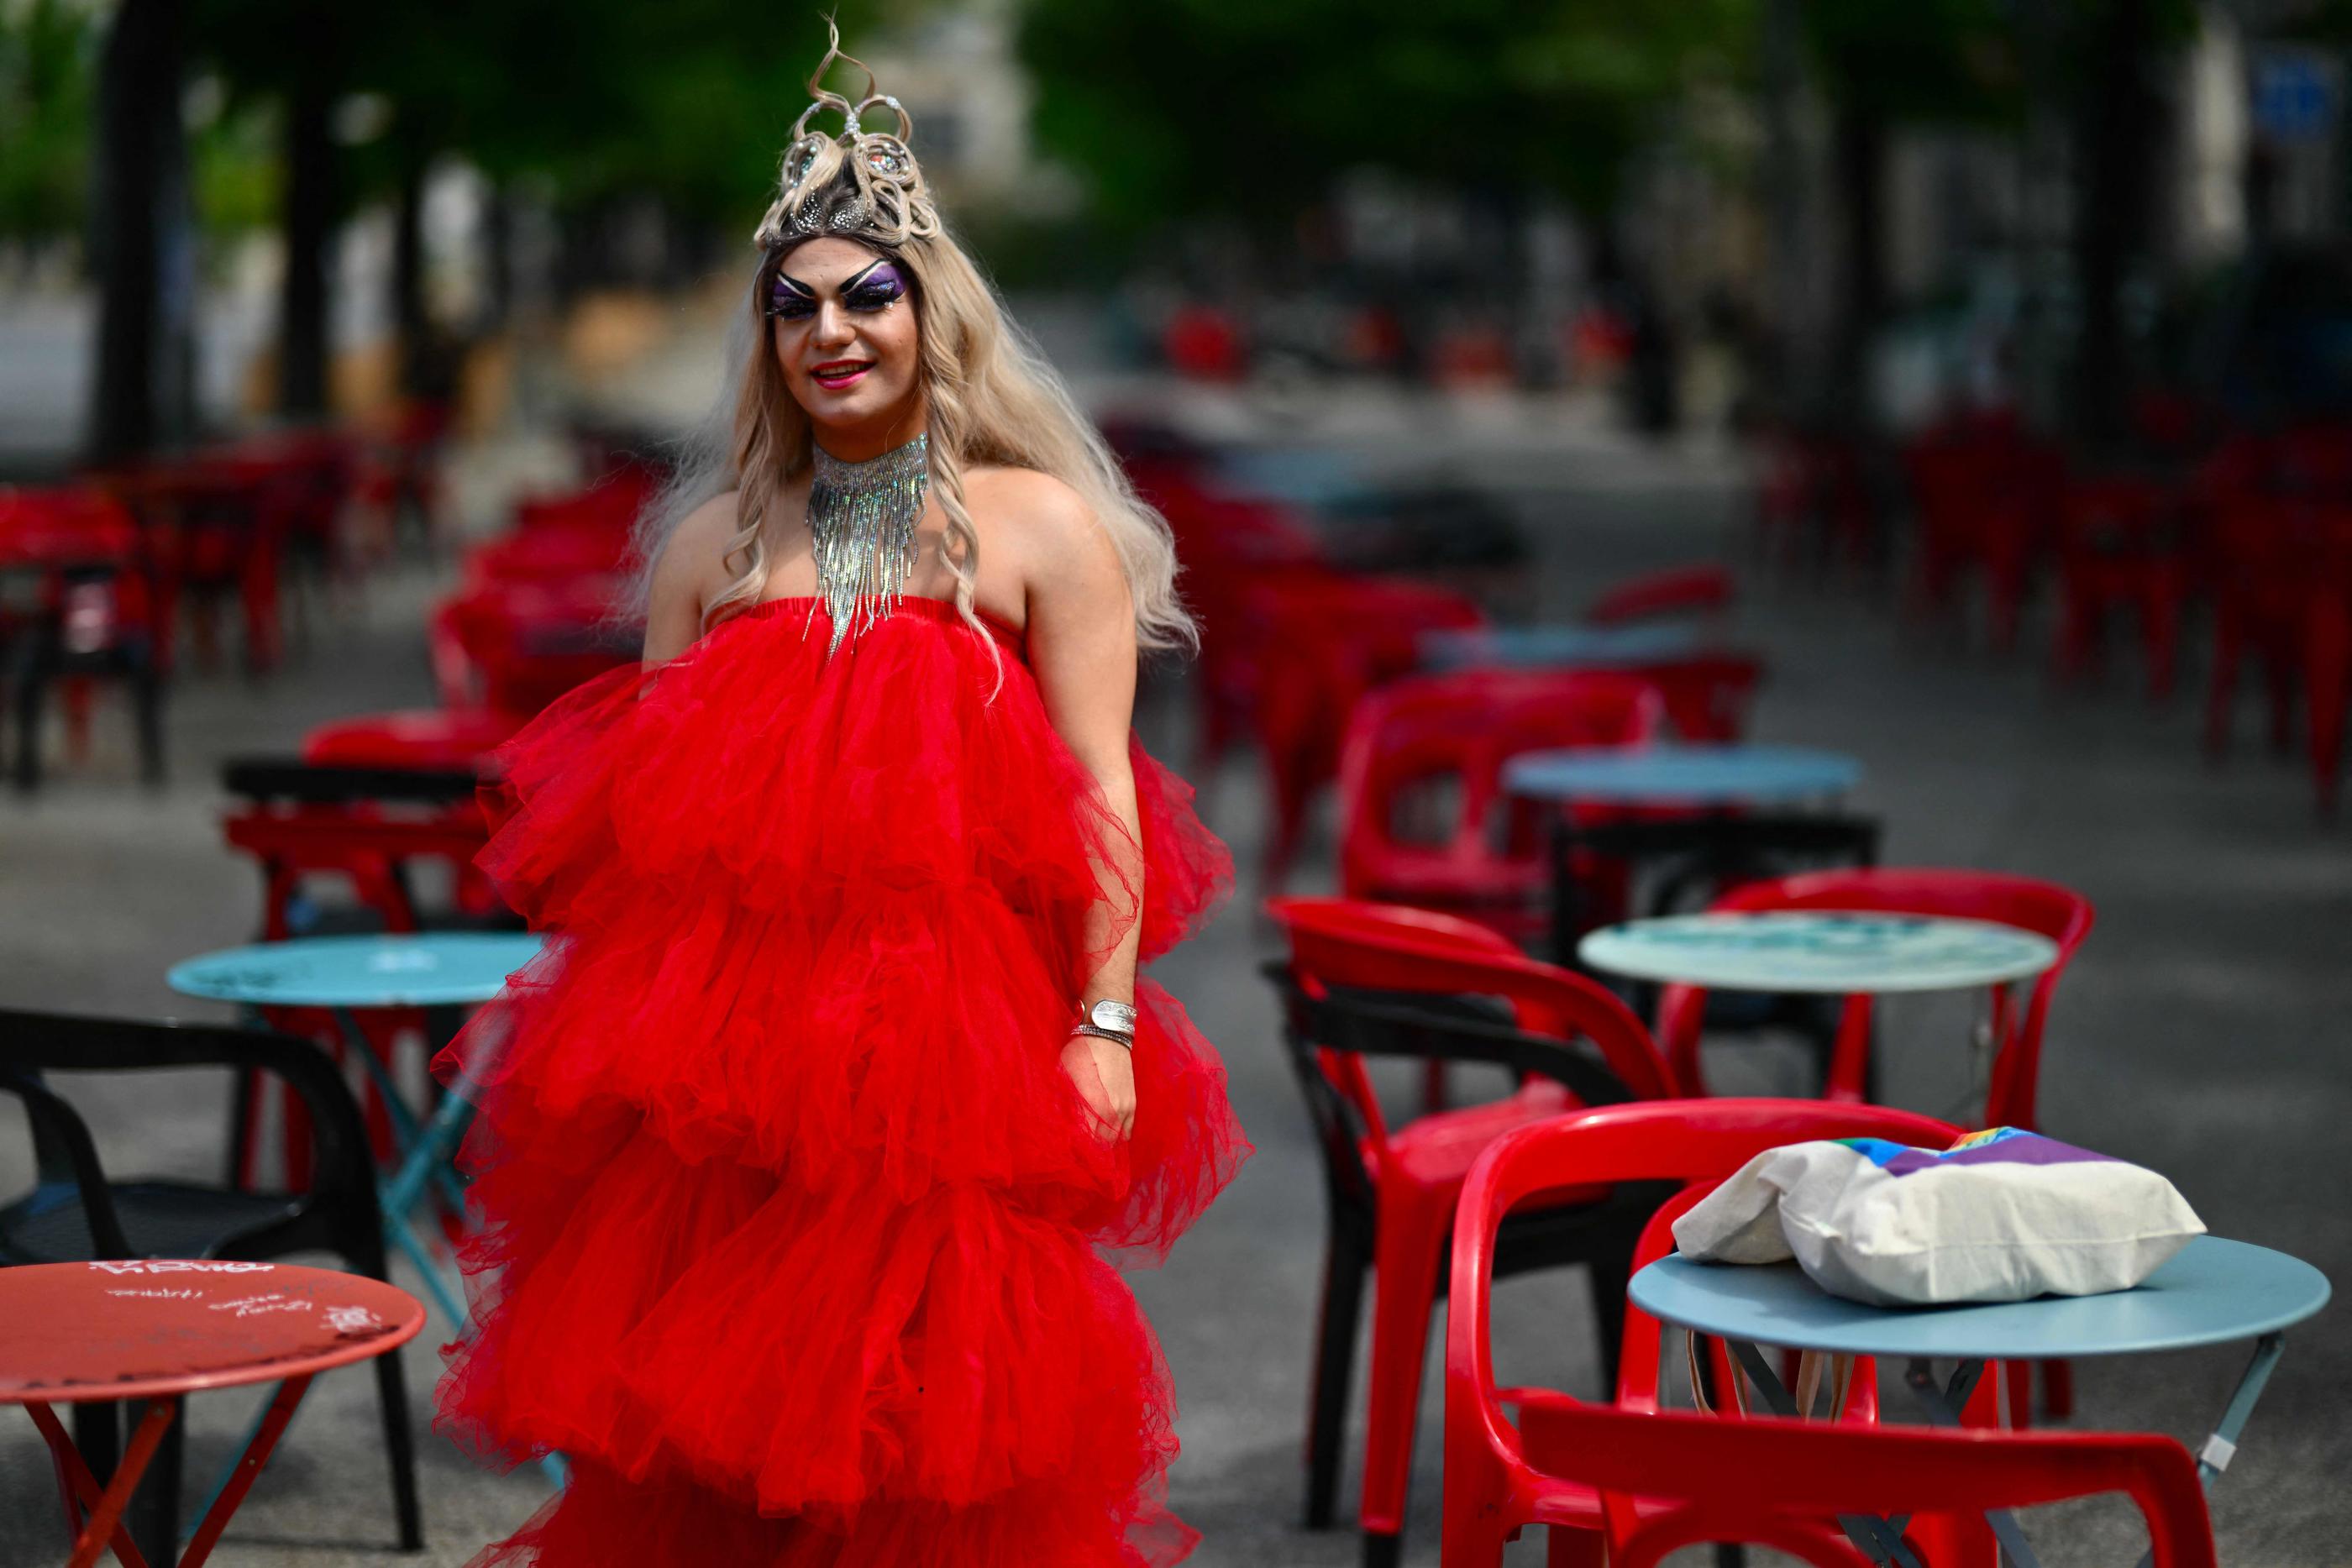 Martin Namias, also known as drag queen "Miss Martini", will holds the Olympic flamme on May 11 in Dignes, poses in Marseille on May 3, 2024. (Photo by Christophe SIMON / AFP)